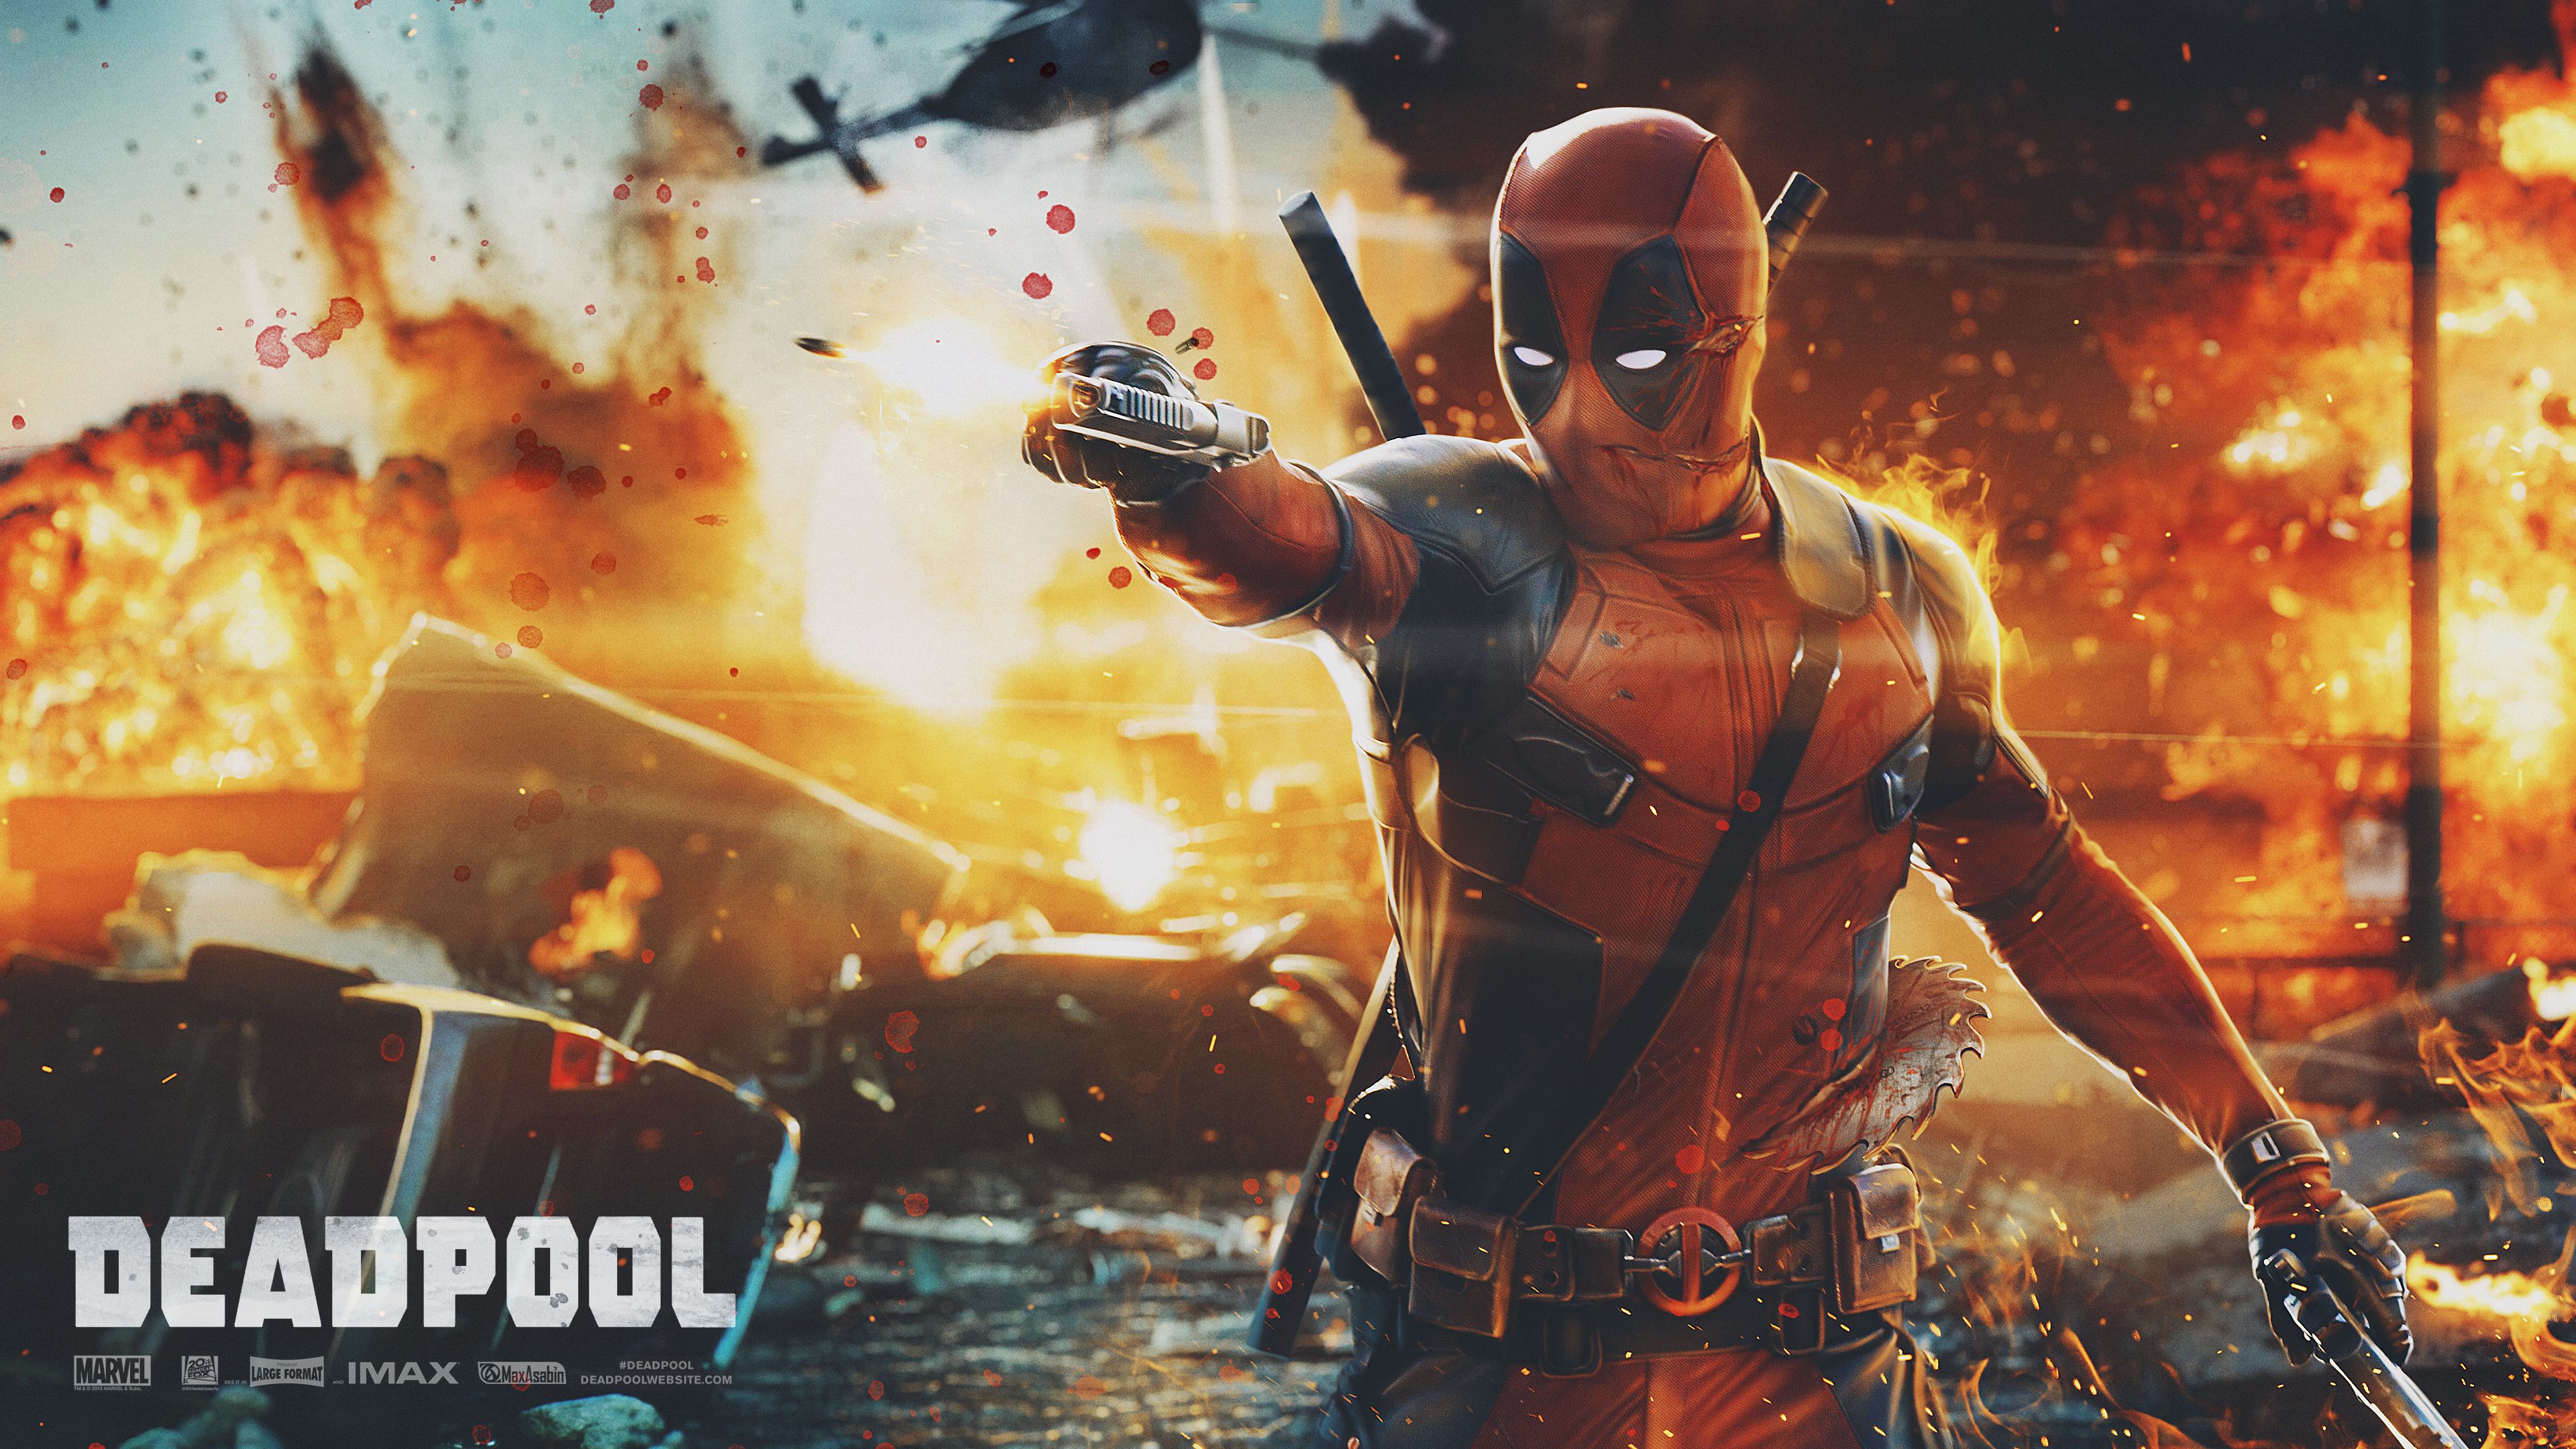 Deadpool Movie Wallpaper background picture